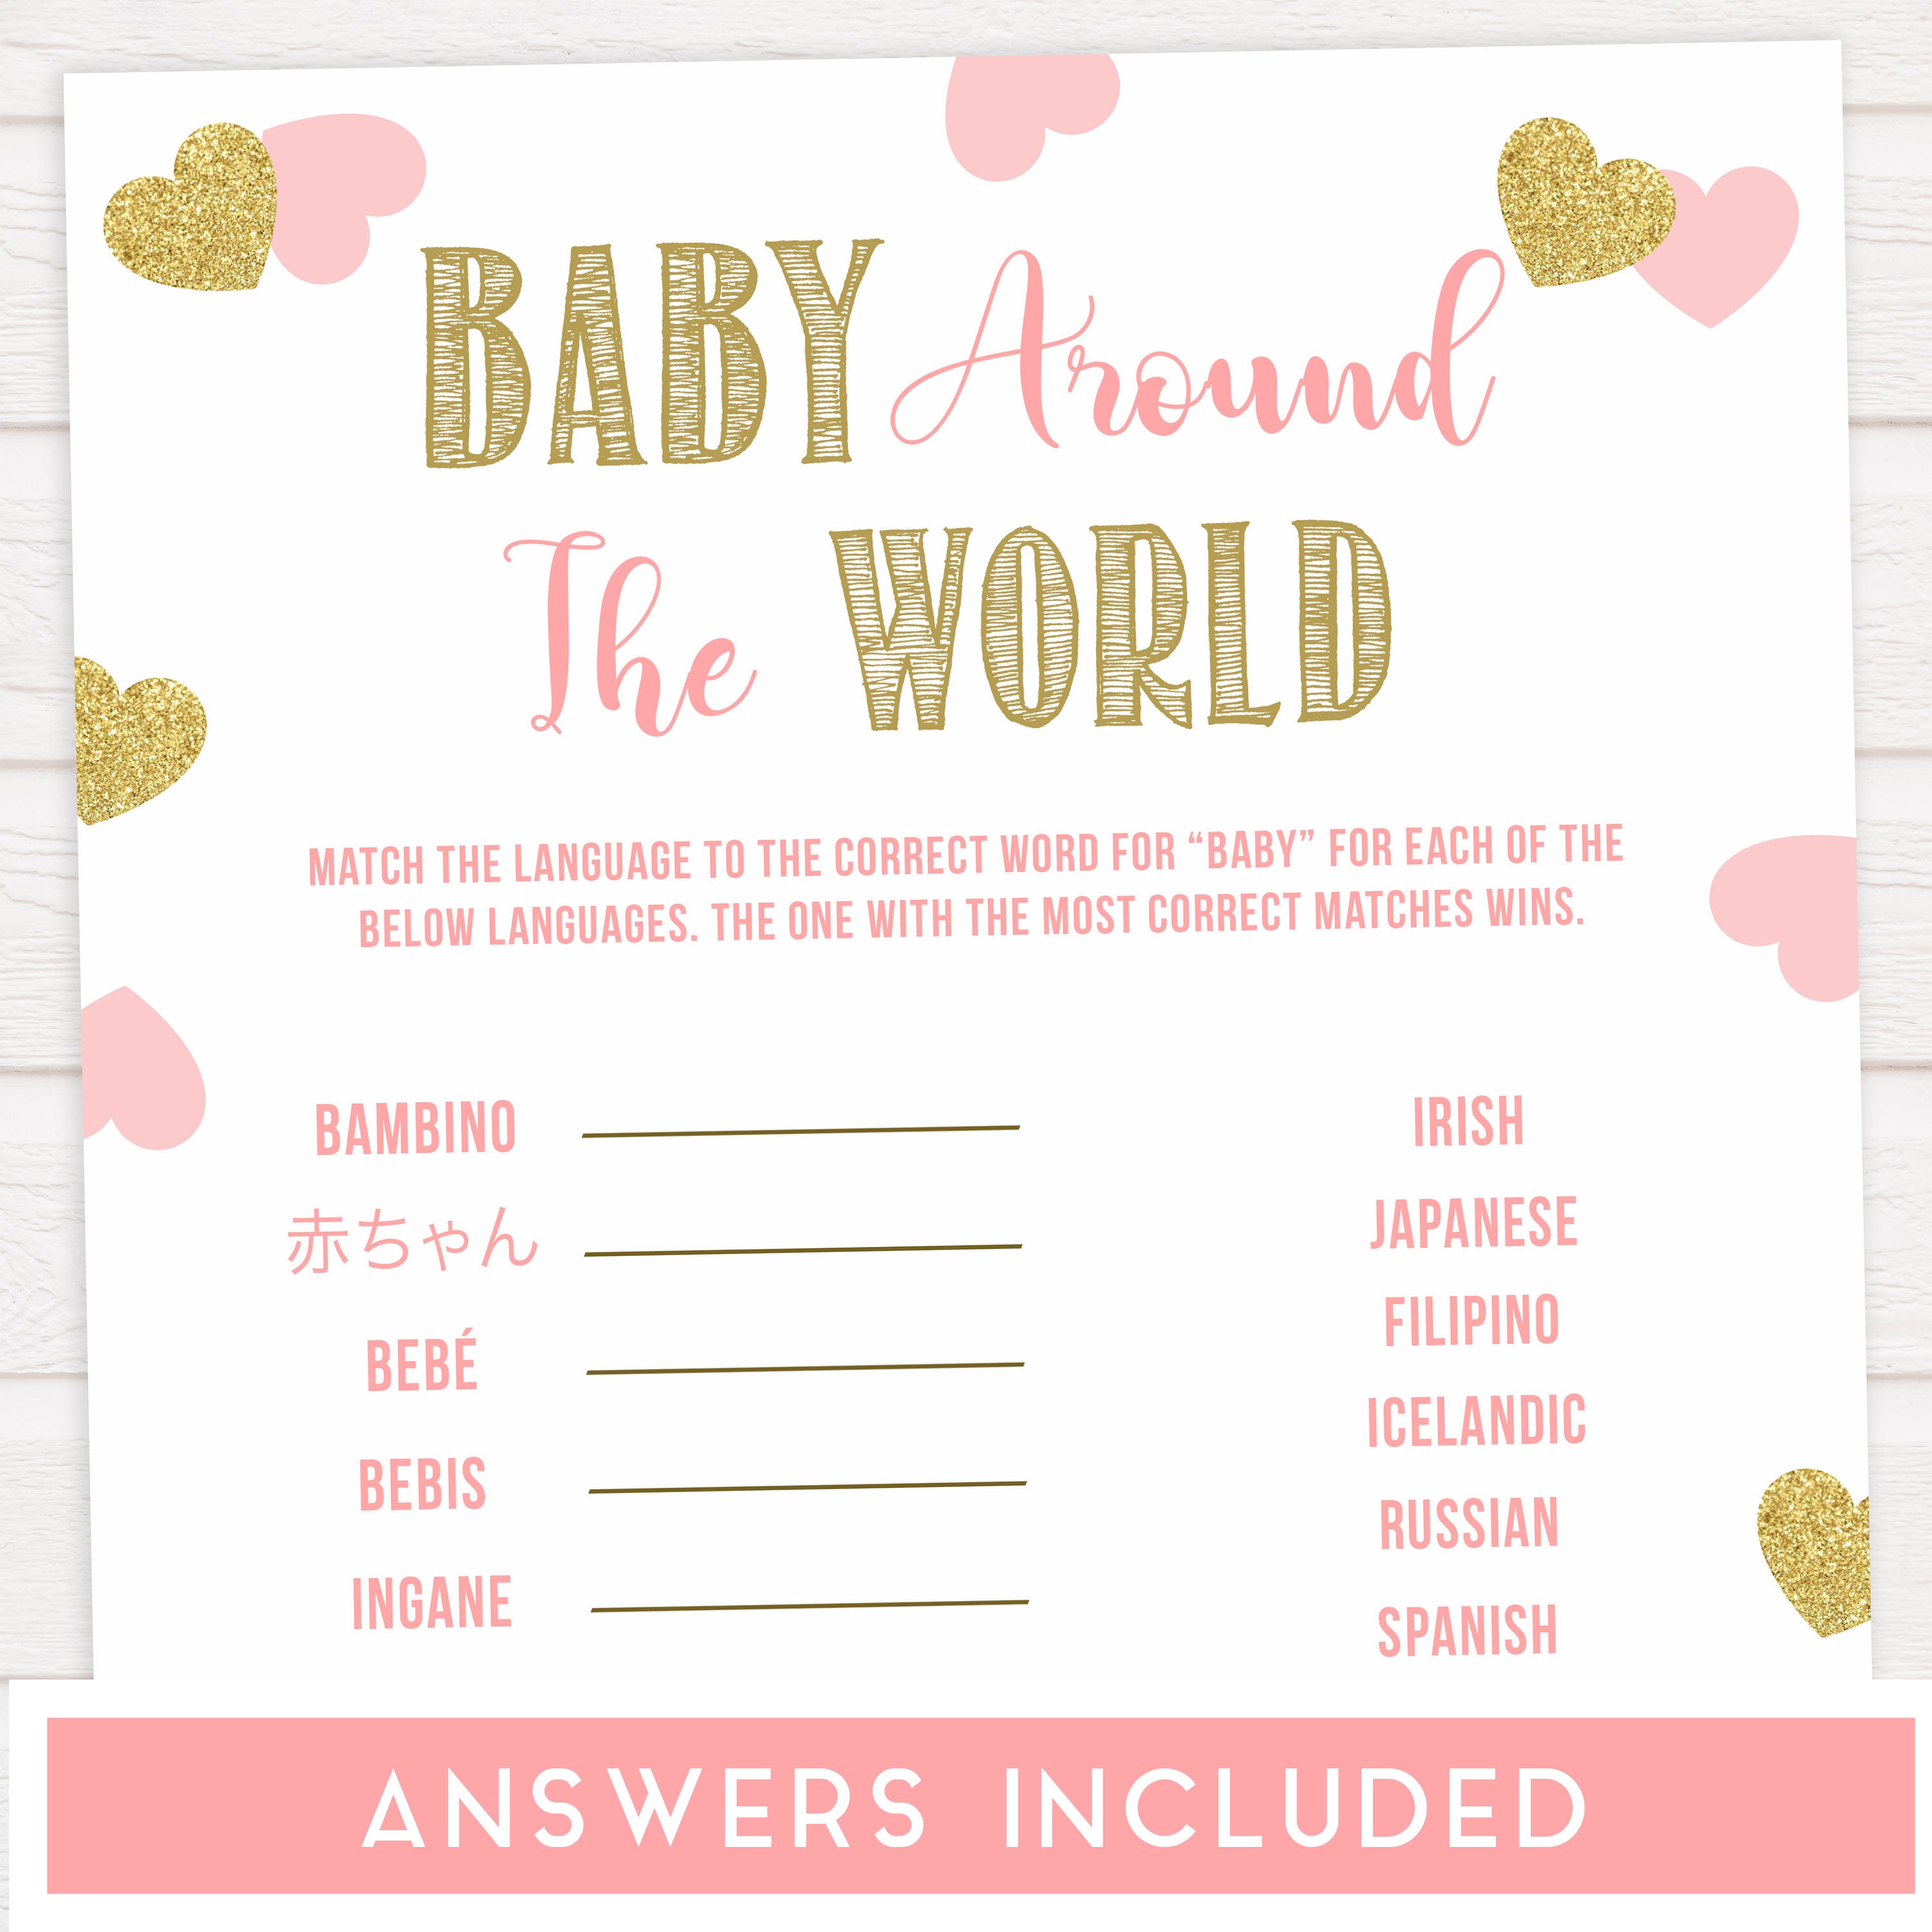 baby around the world game, Printable baby shower games, large pink hearts fun baby games, baby shower games, fun baby shower ideas, top baby shower ideas, gold pink hearts shower baby shower, pink hearts baby shower ideas